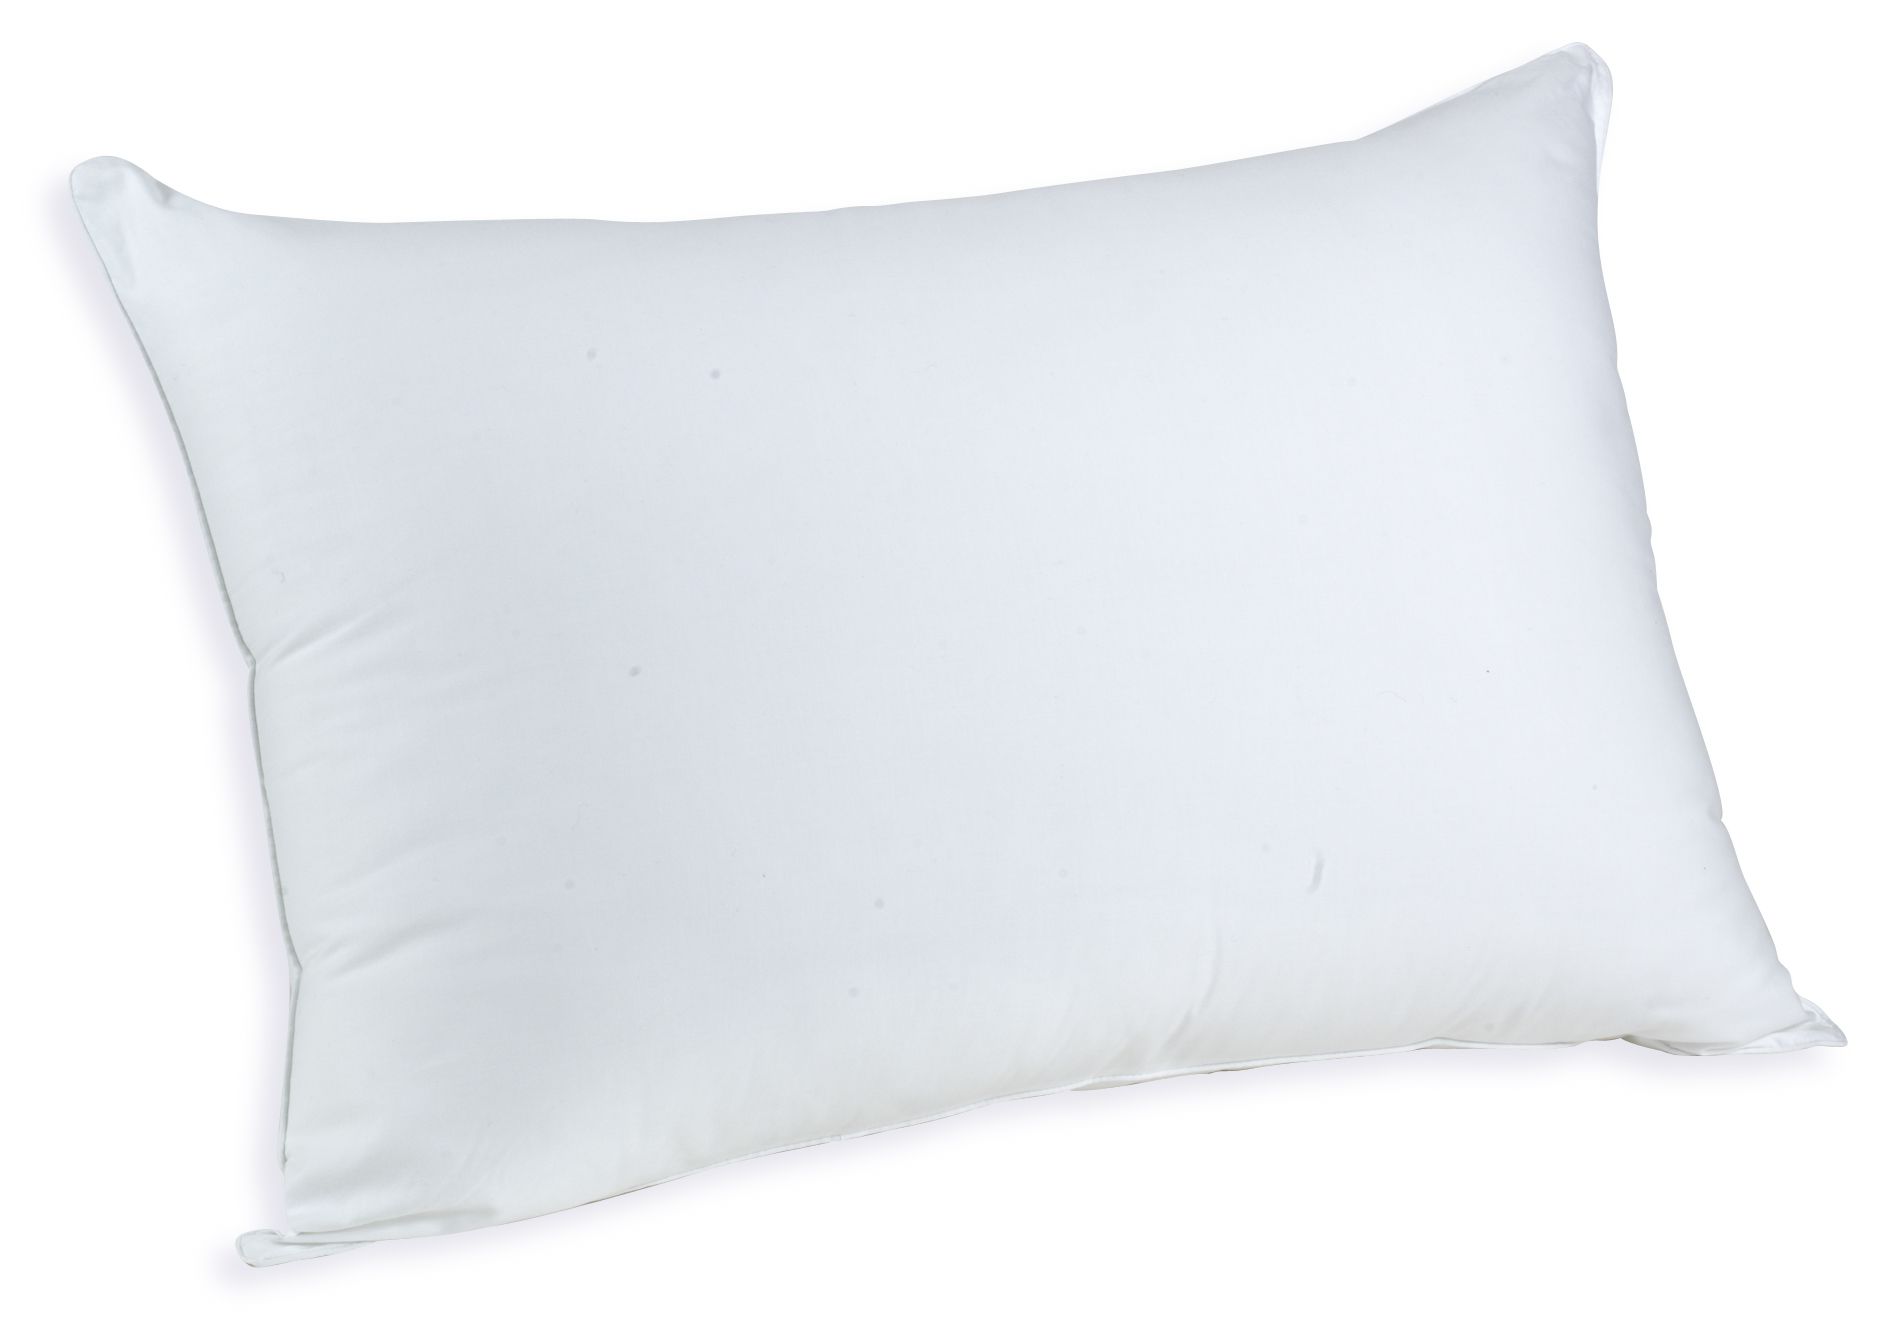 The Clean One Pillow